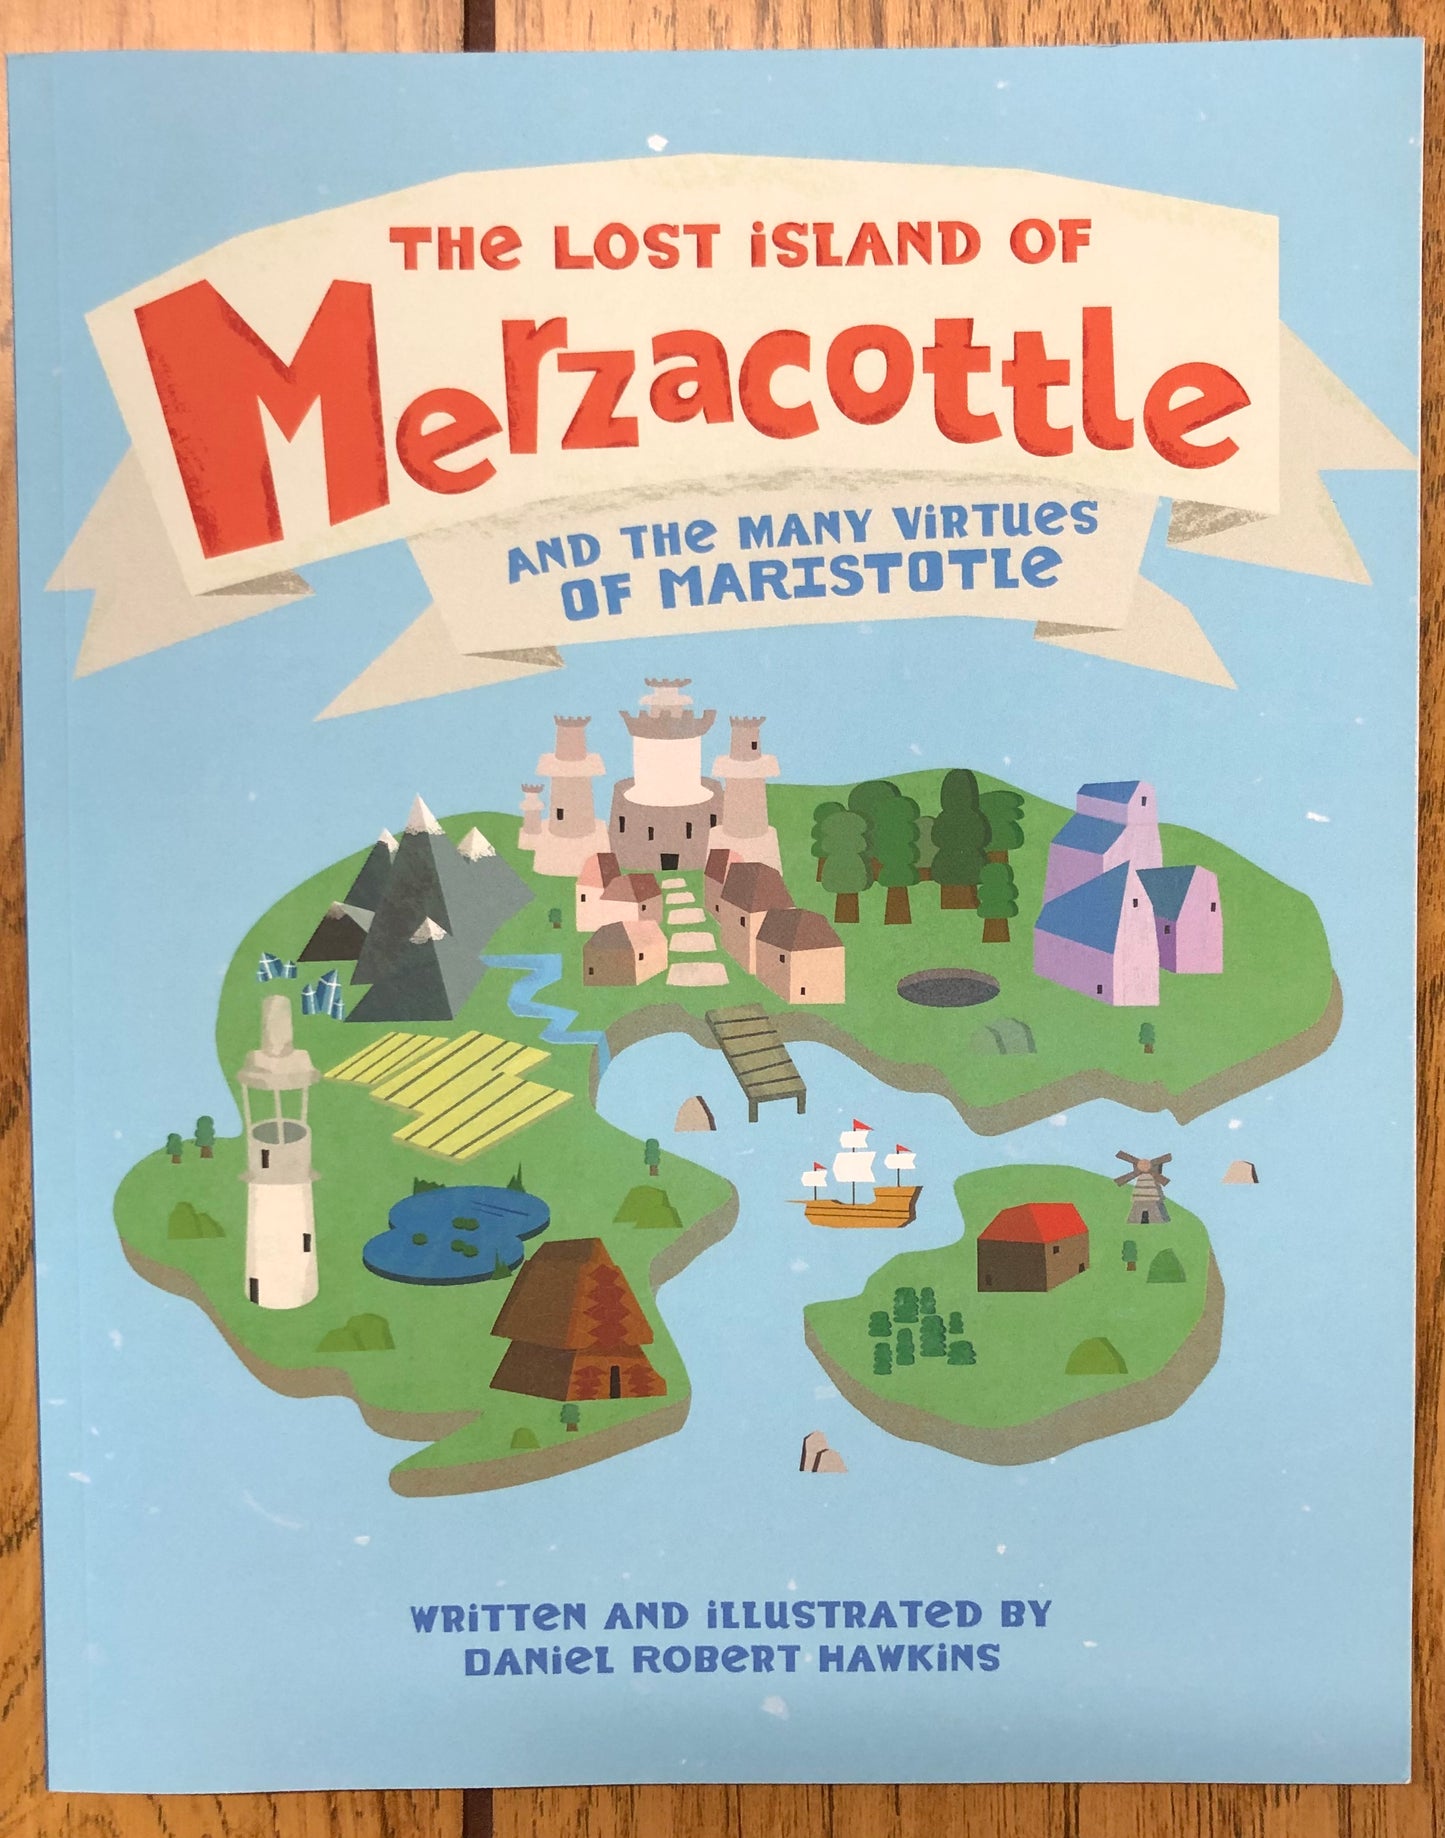 The Lost Island of Merzacottle